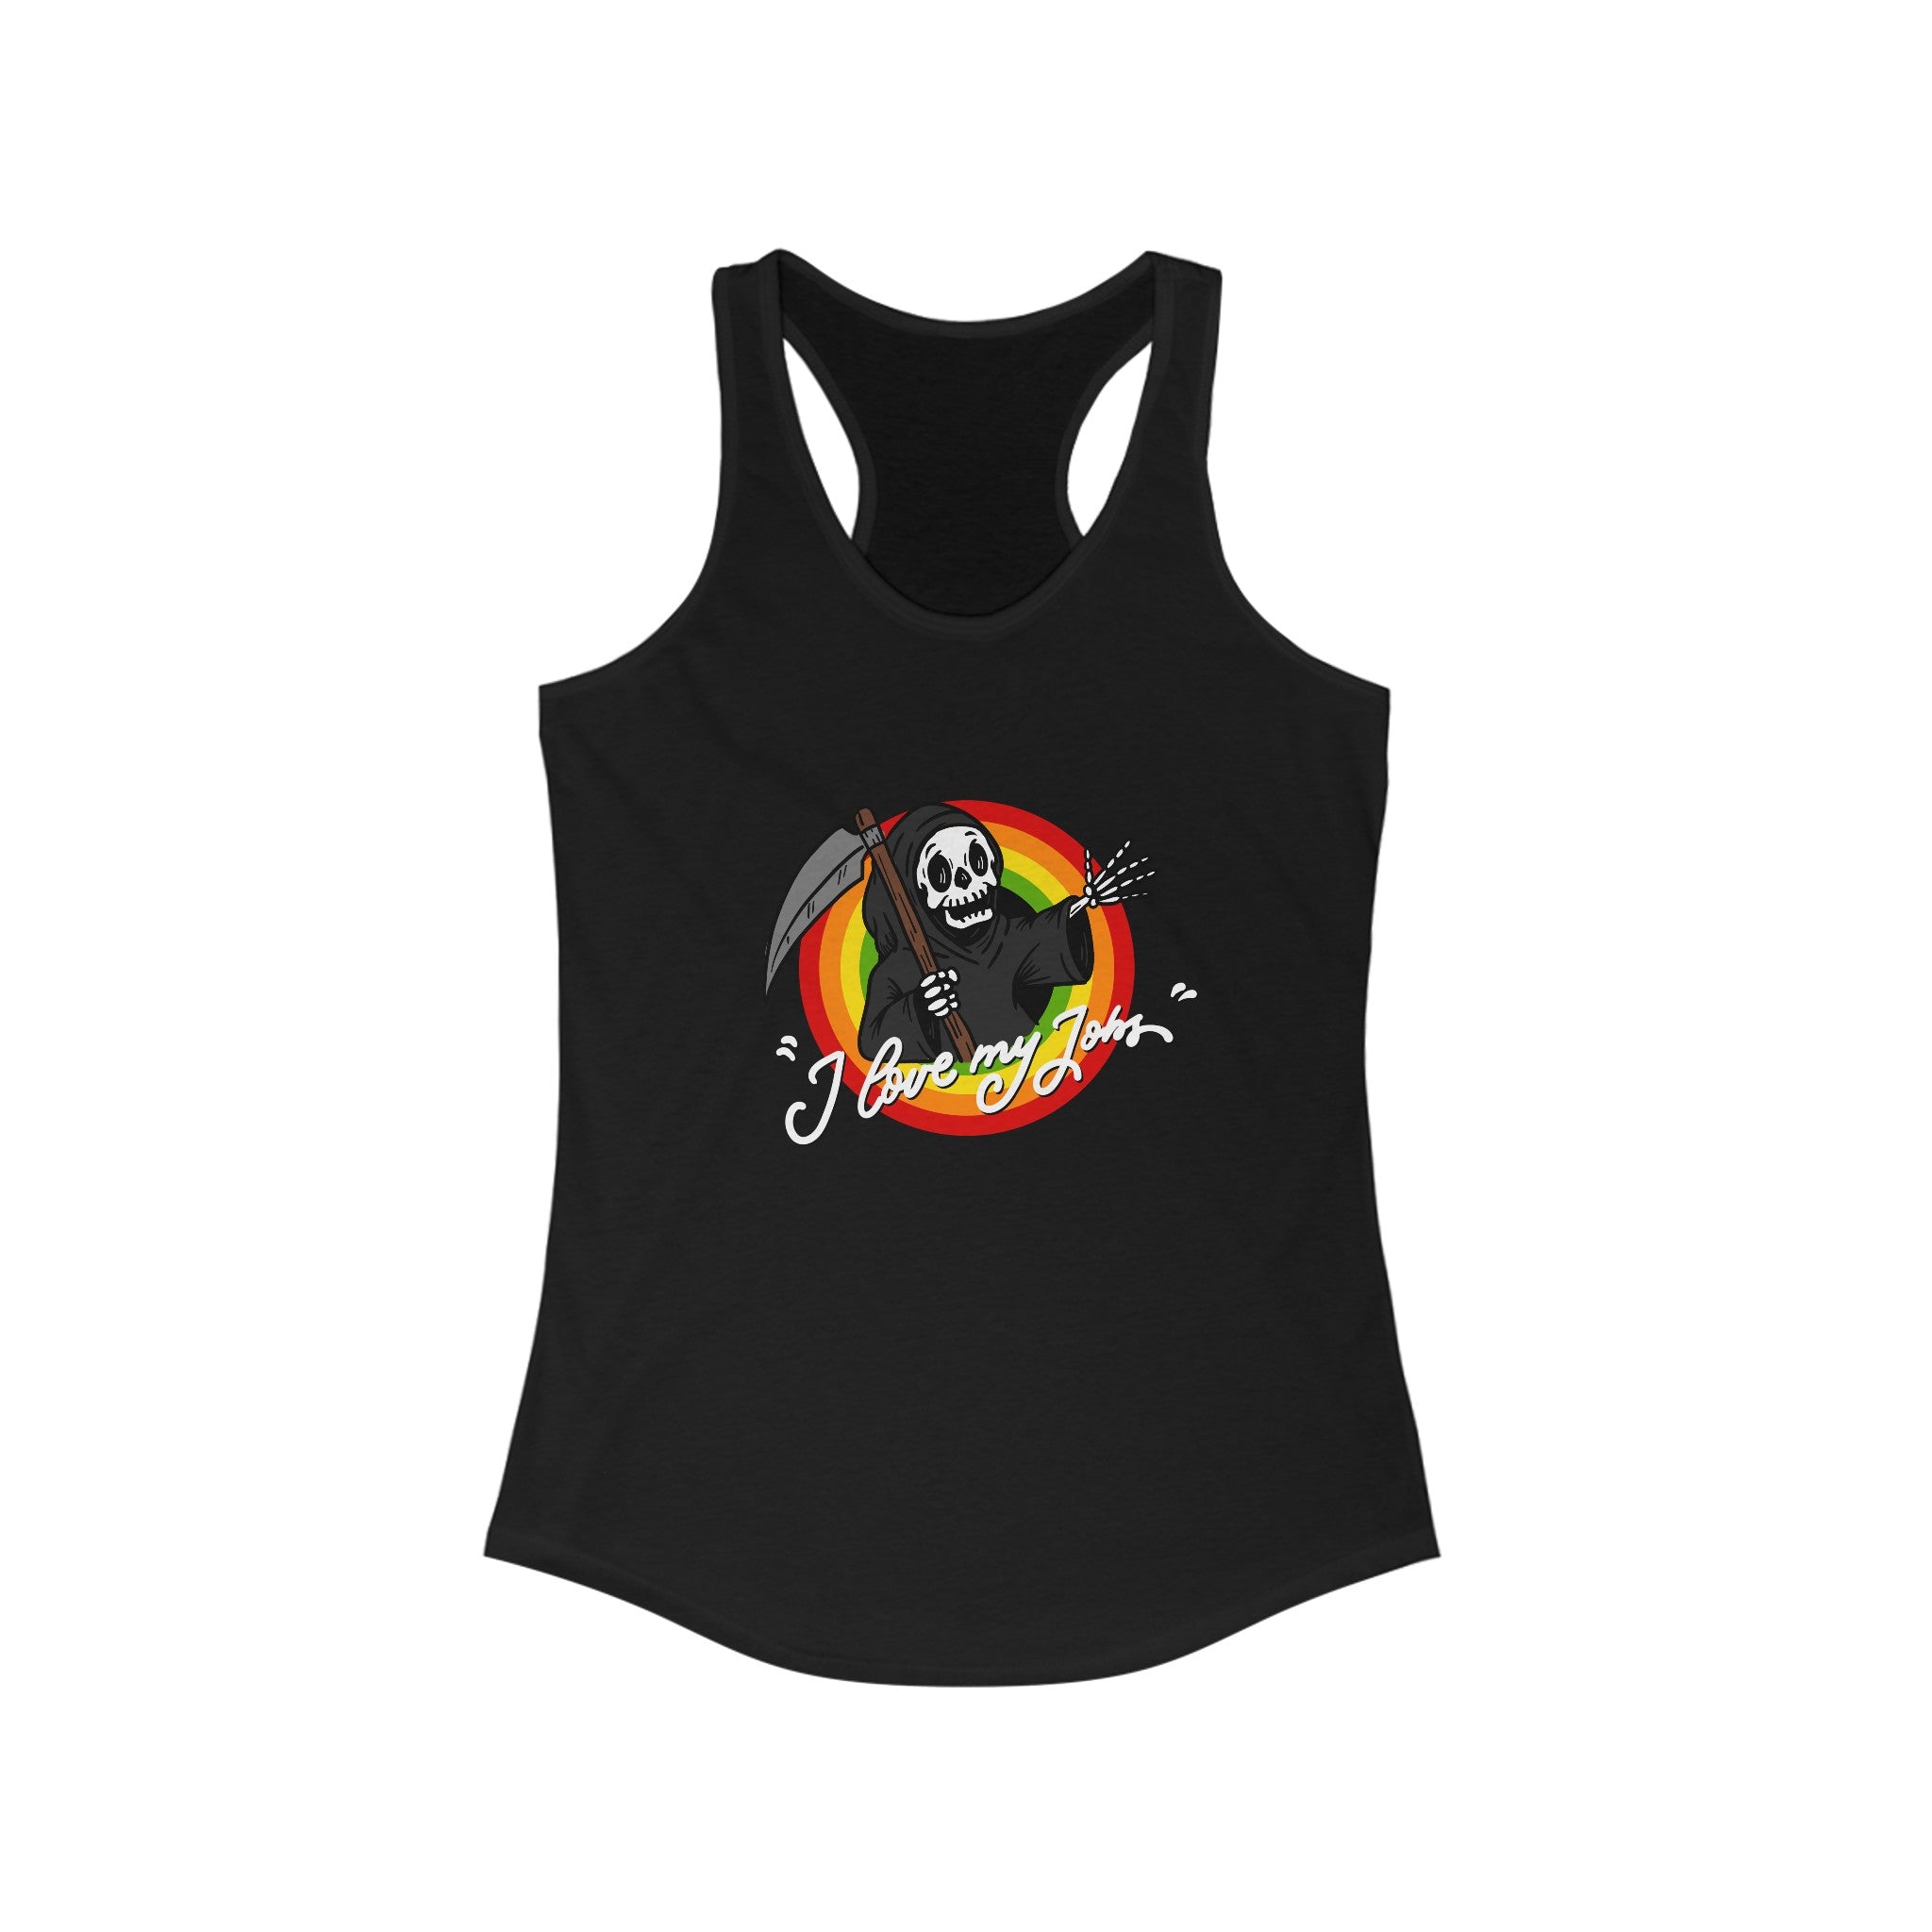 Love My Jobs - Women's Racerback Tank featuring a graphic of a grim reaper with the text "I love my job" in colorful letters on the front, perfect for your active life. Lightweight and comfortable, it's ideal for any activity.